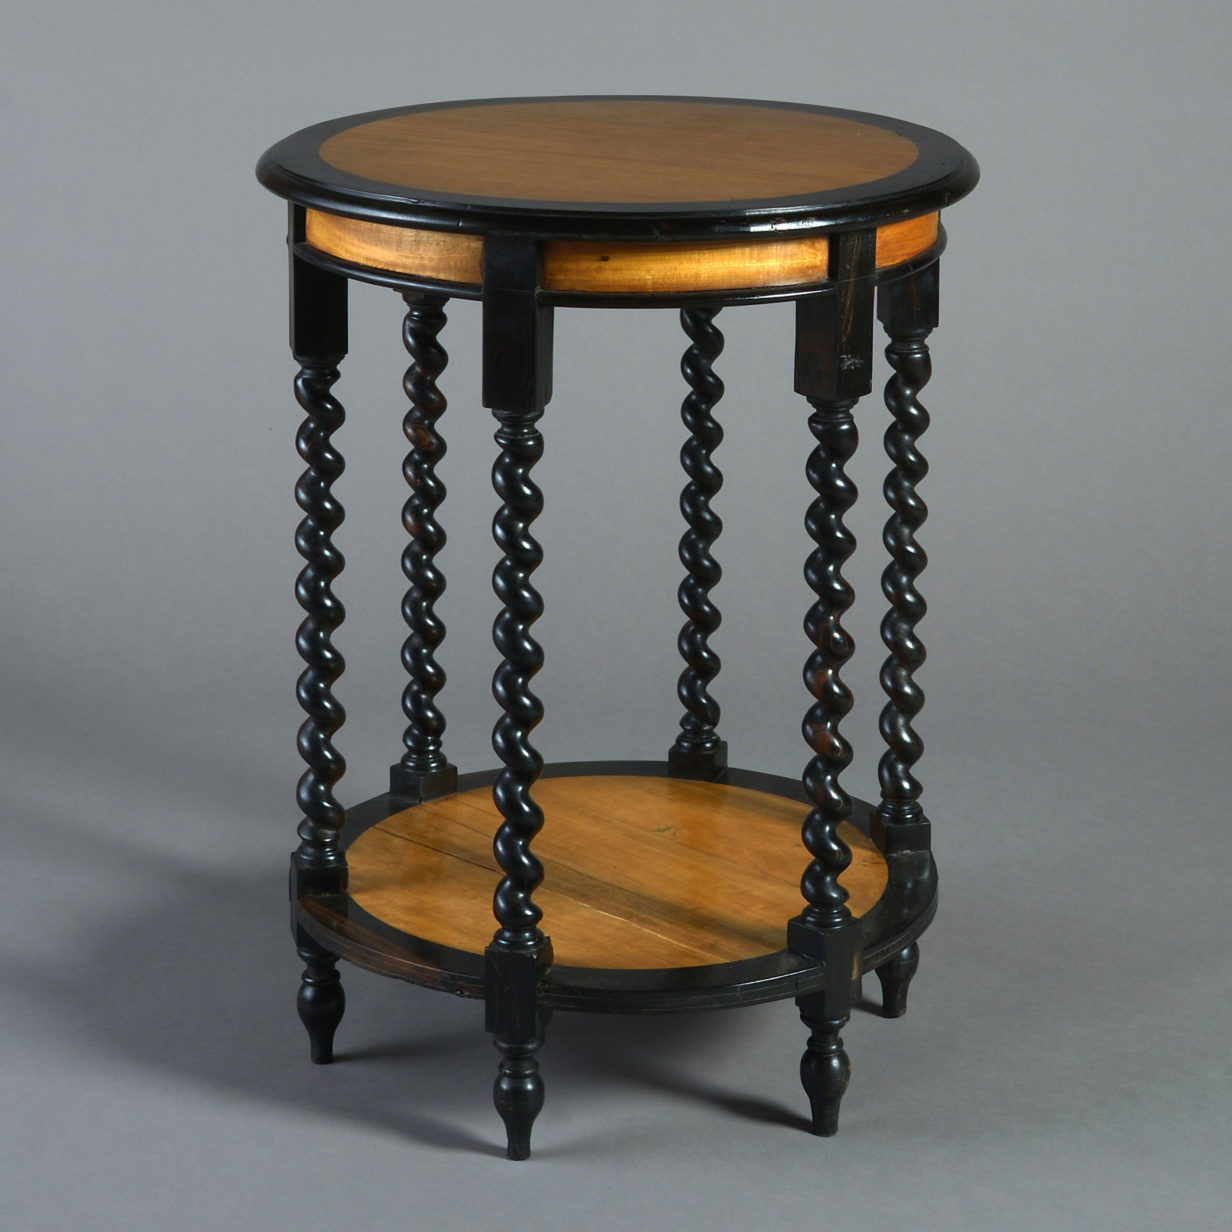 Pair of early 20th century anglo-indian occasional tables